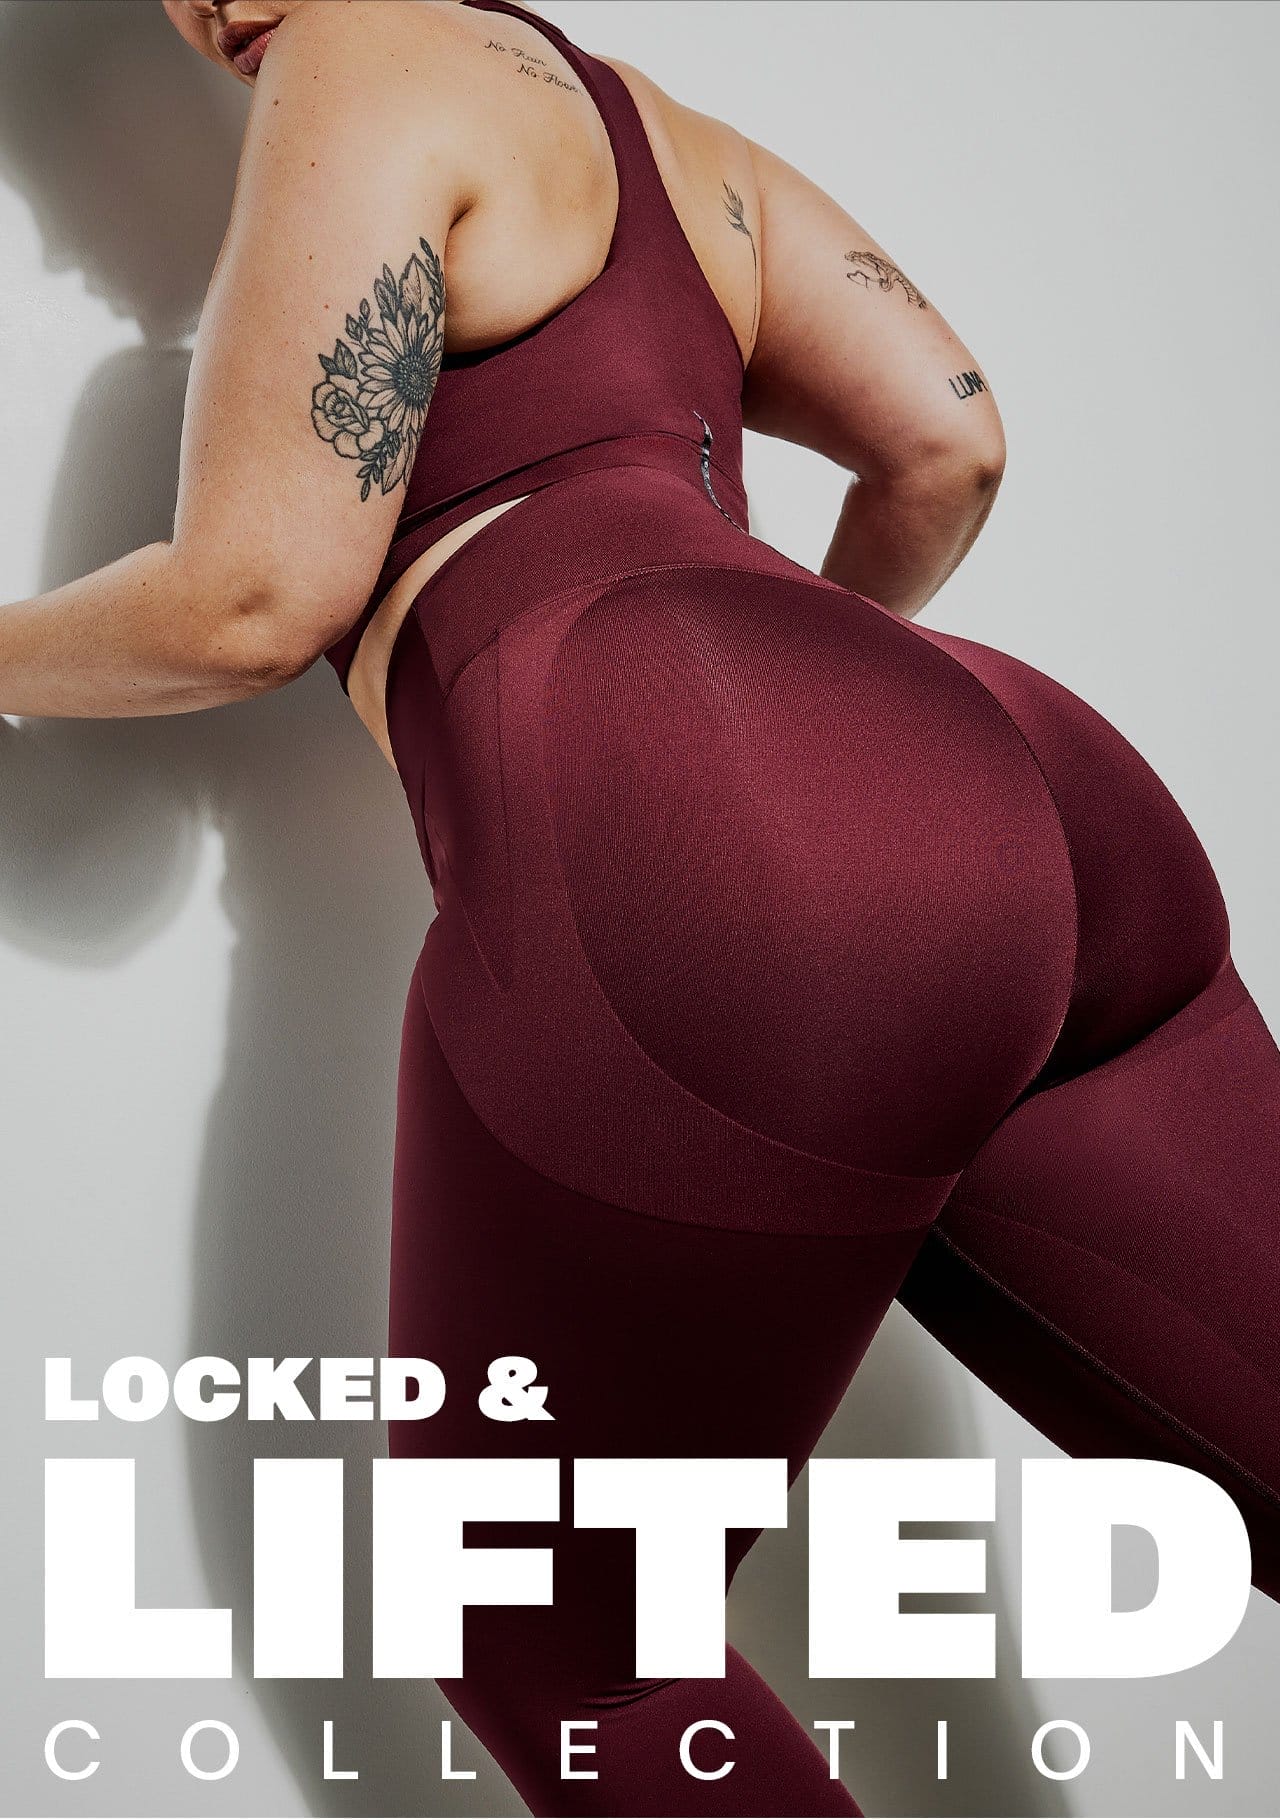 Locked & Lifted Collection\xa0